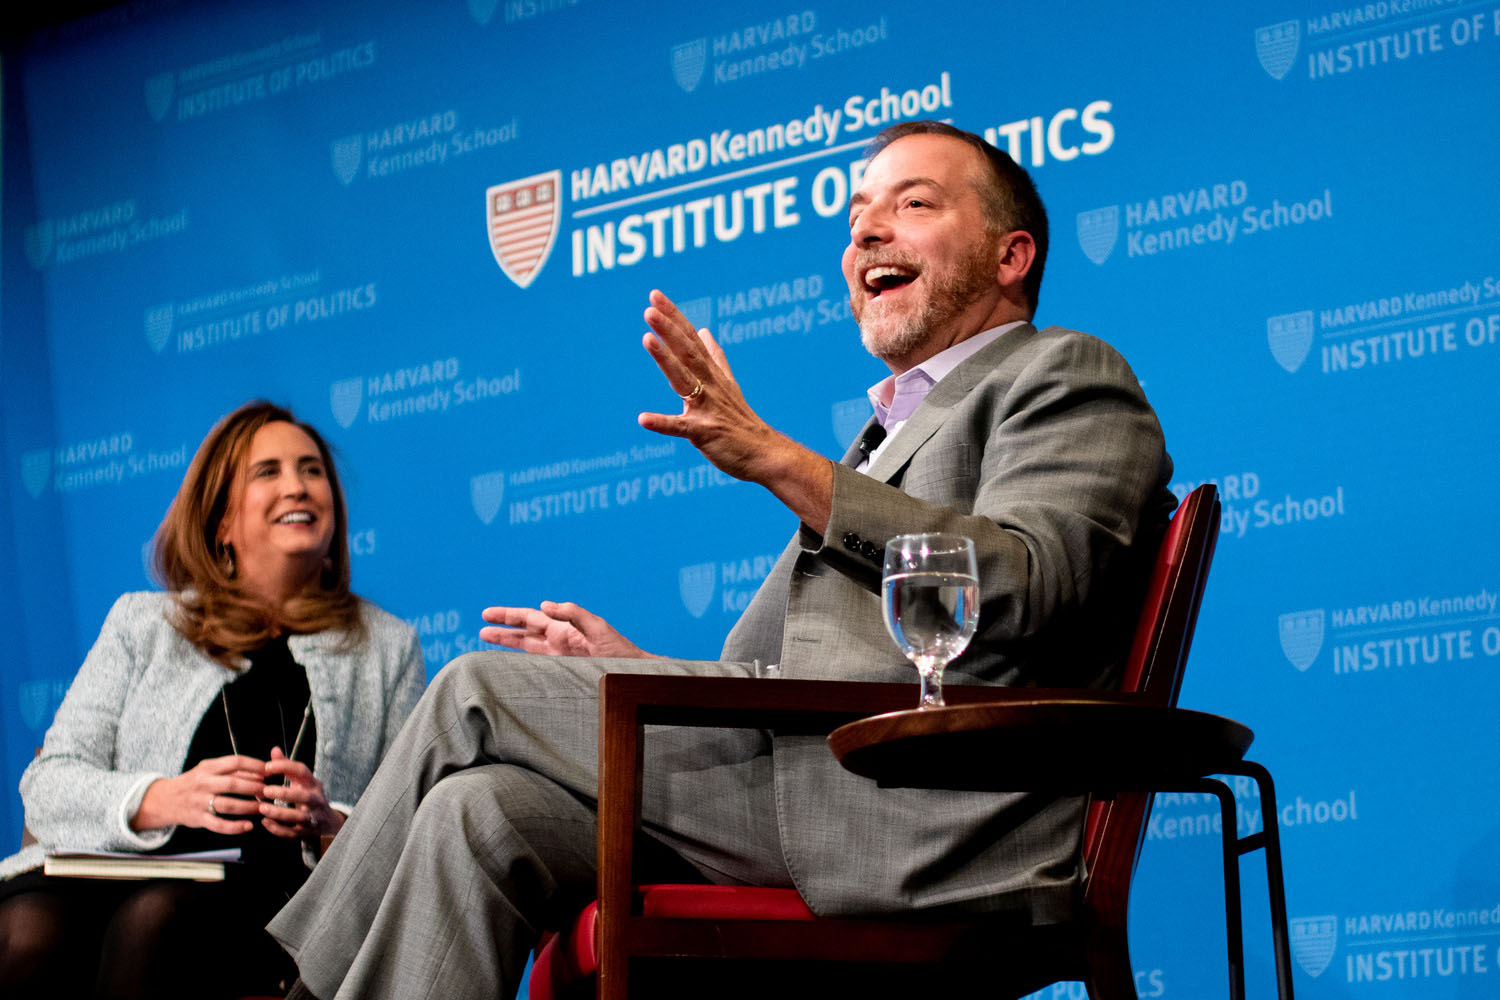 Chuck Todd speaks at a Harvard Institute of Politics forum, discussing the upcoming 2024 U.S. presidential election.